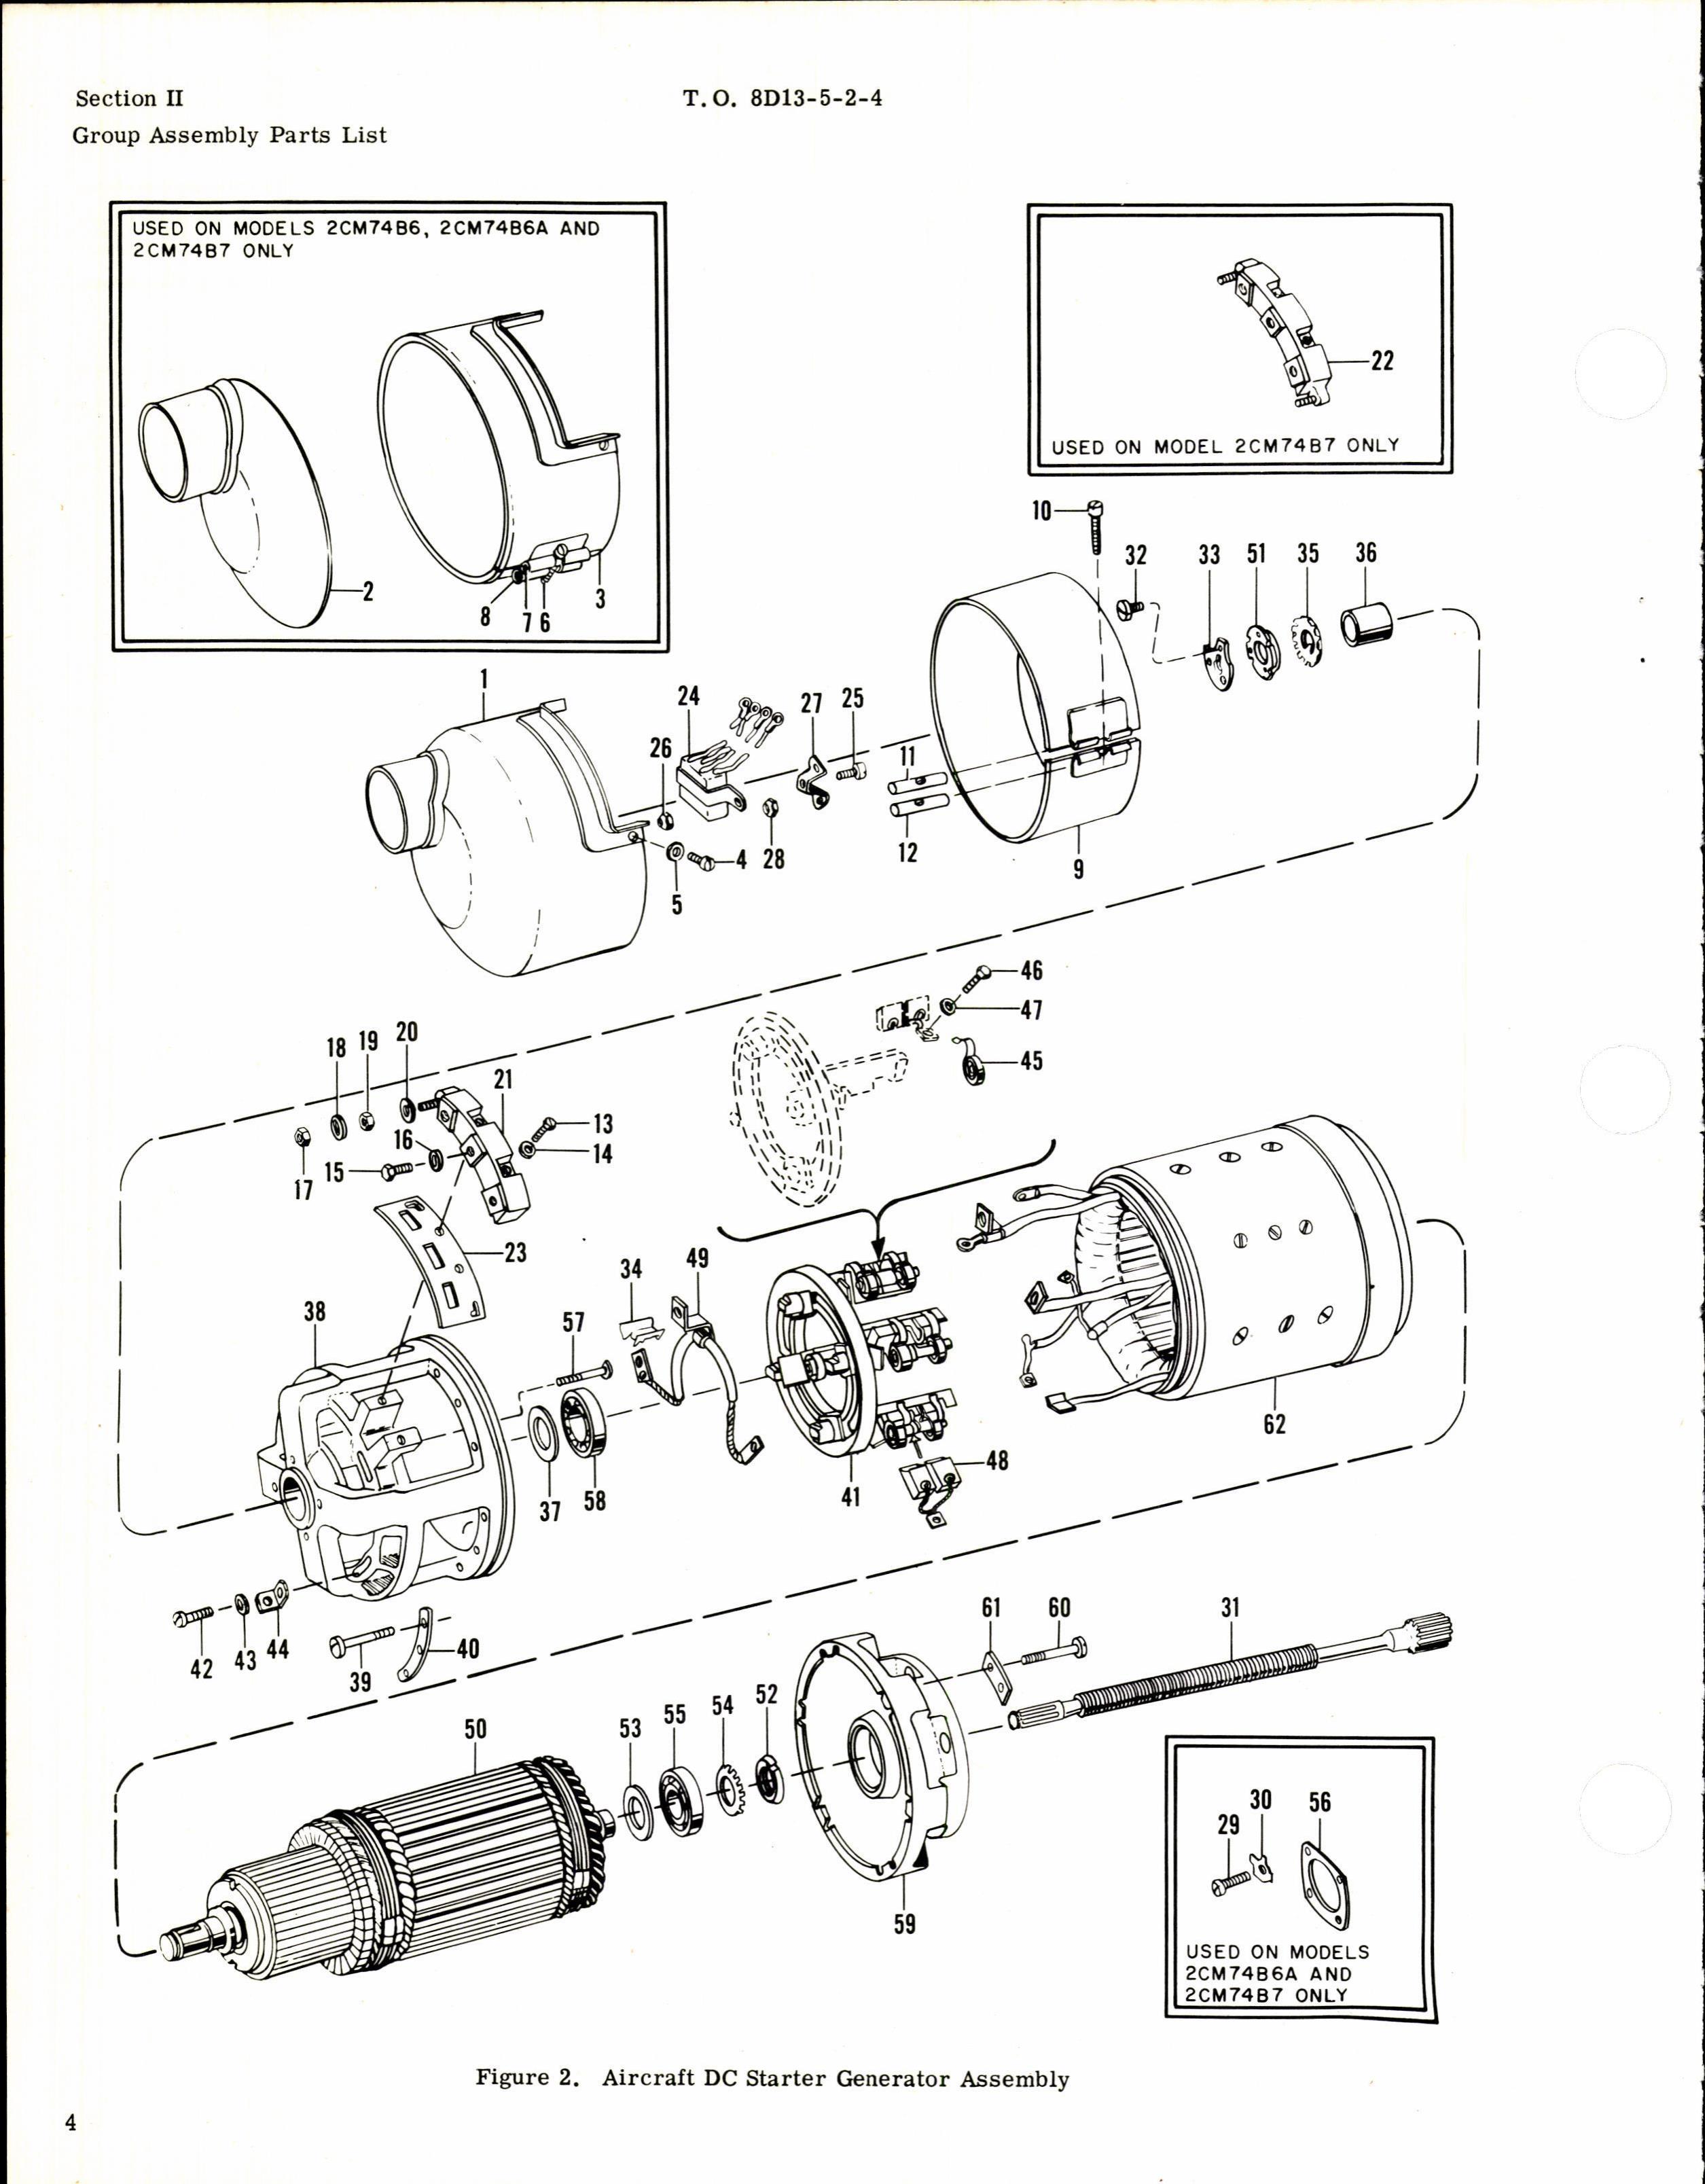 Sample page 4 from AirCorps Library document: Illustrated Parts Breakdown for GE Aircraft DC Starter Generator